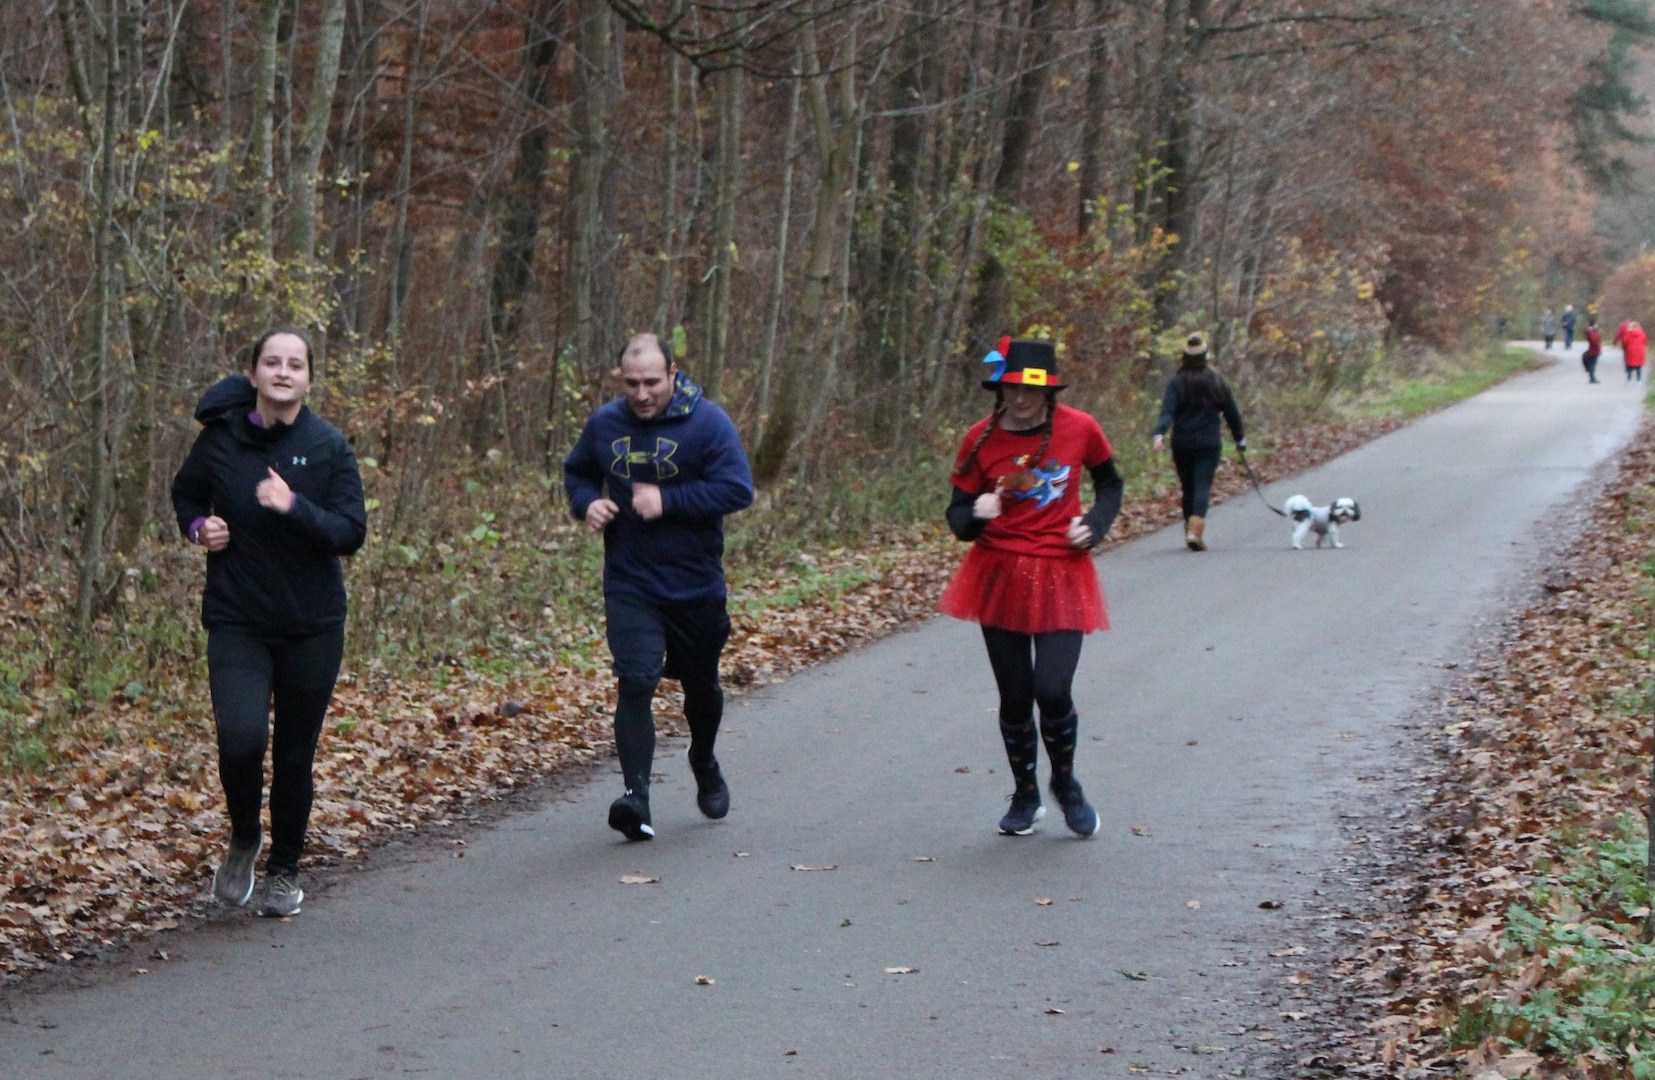 A group pf people run along a wooded path.